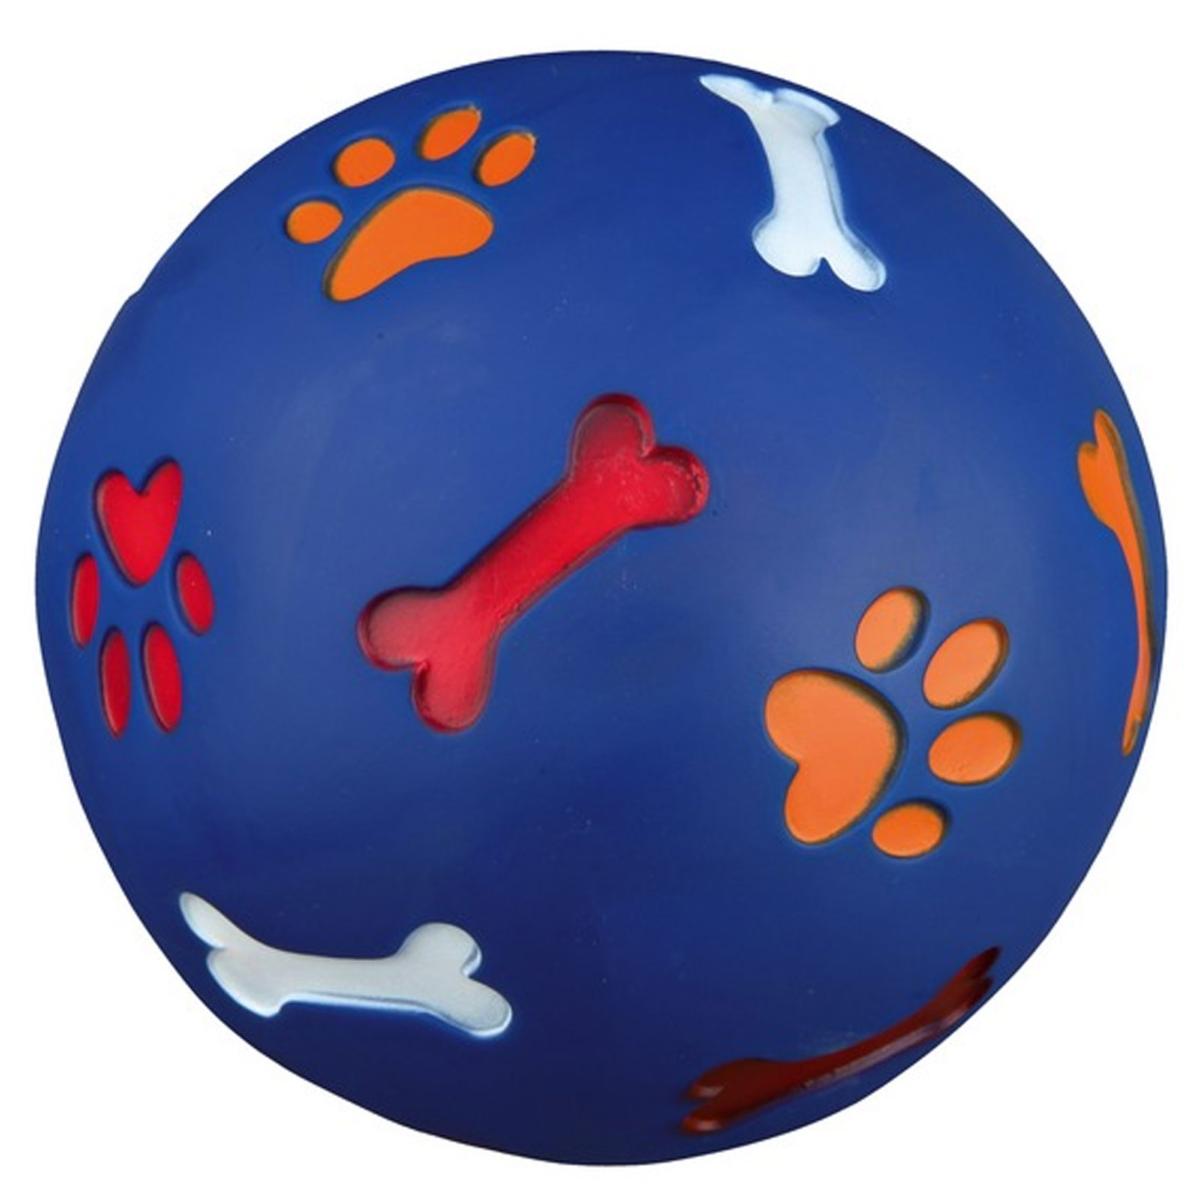 Trixie Snack Ball - Treat Ball for Dogs